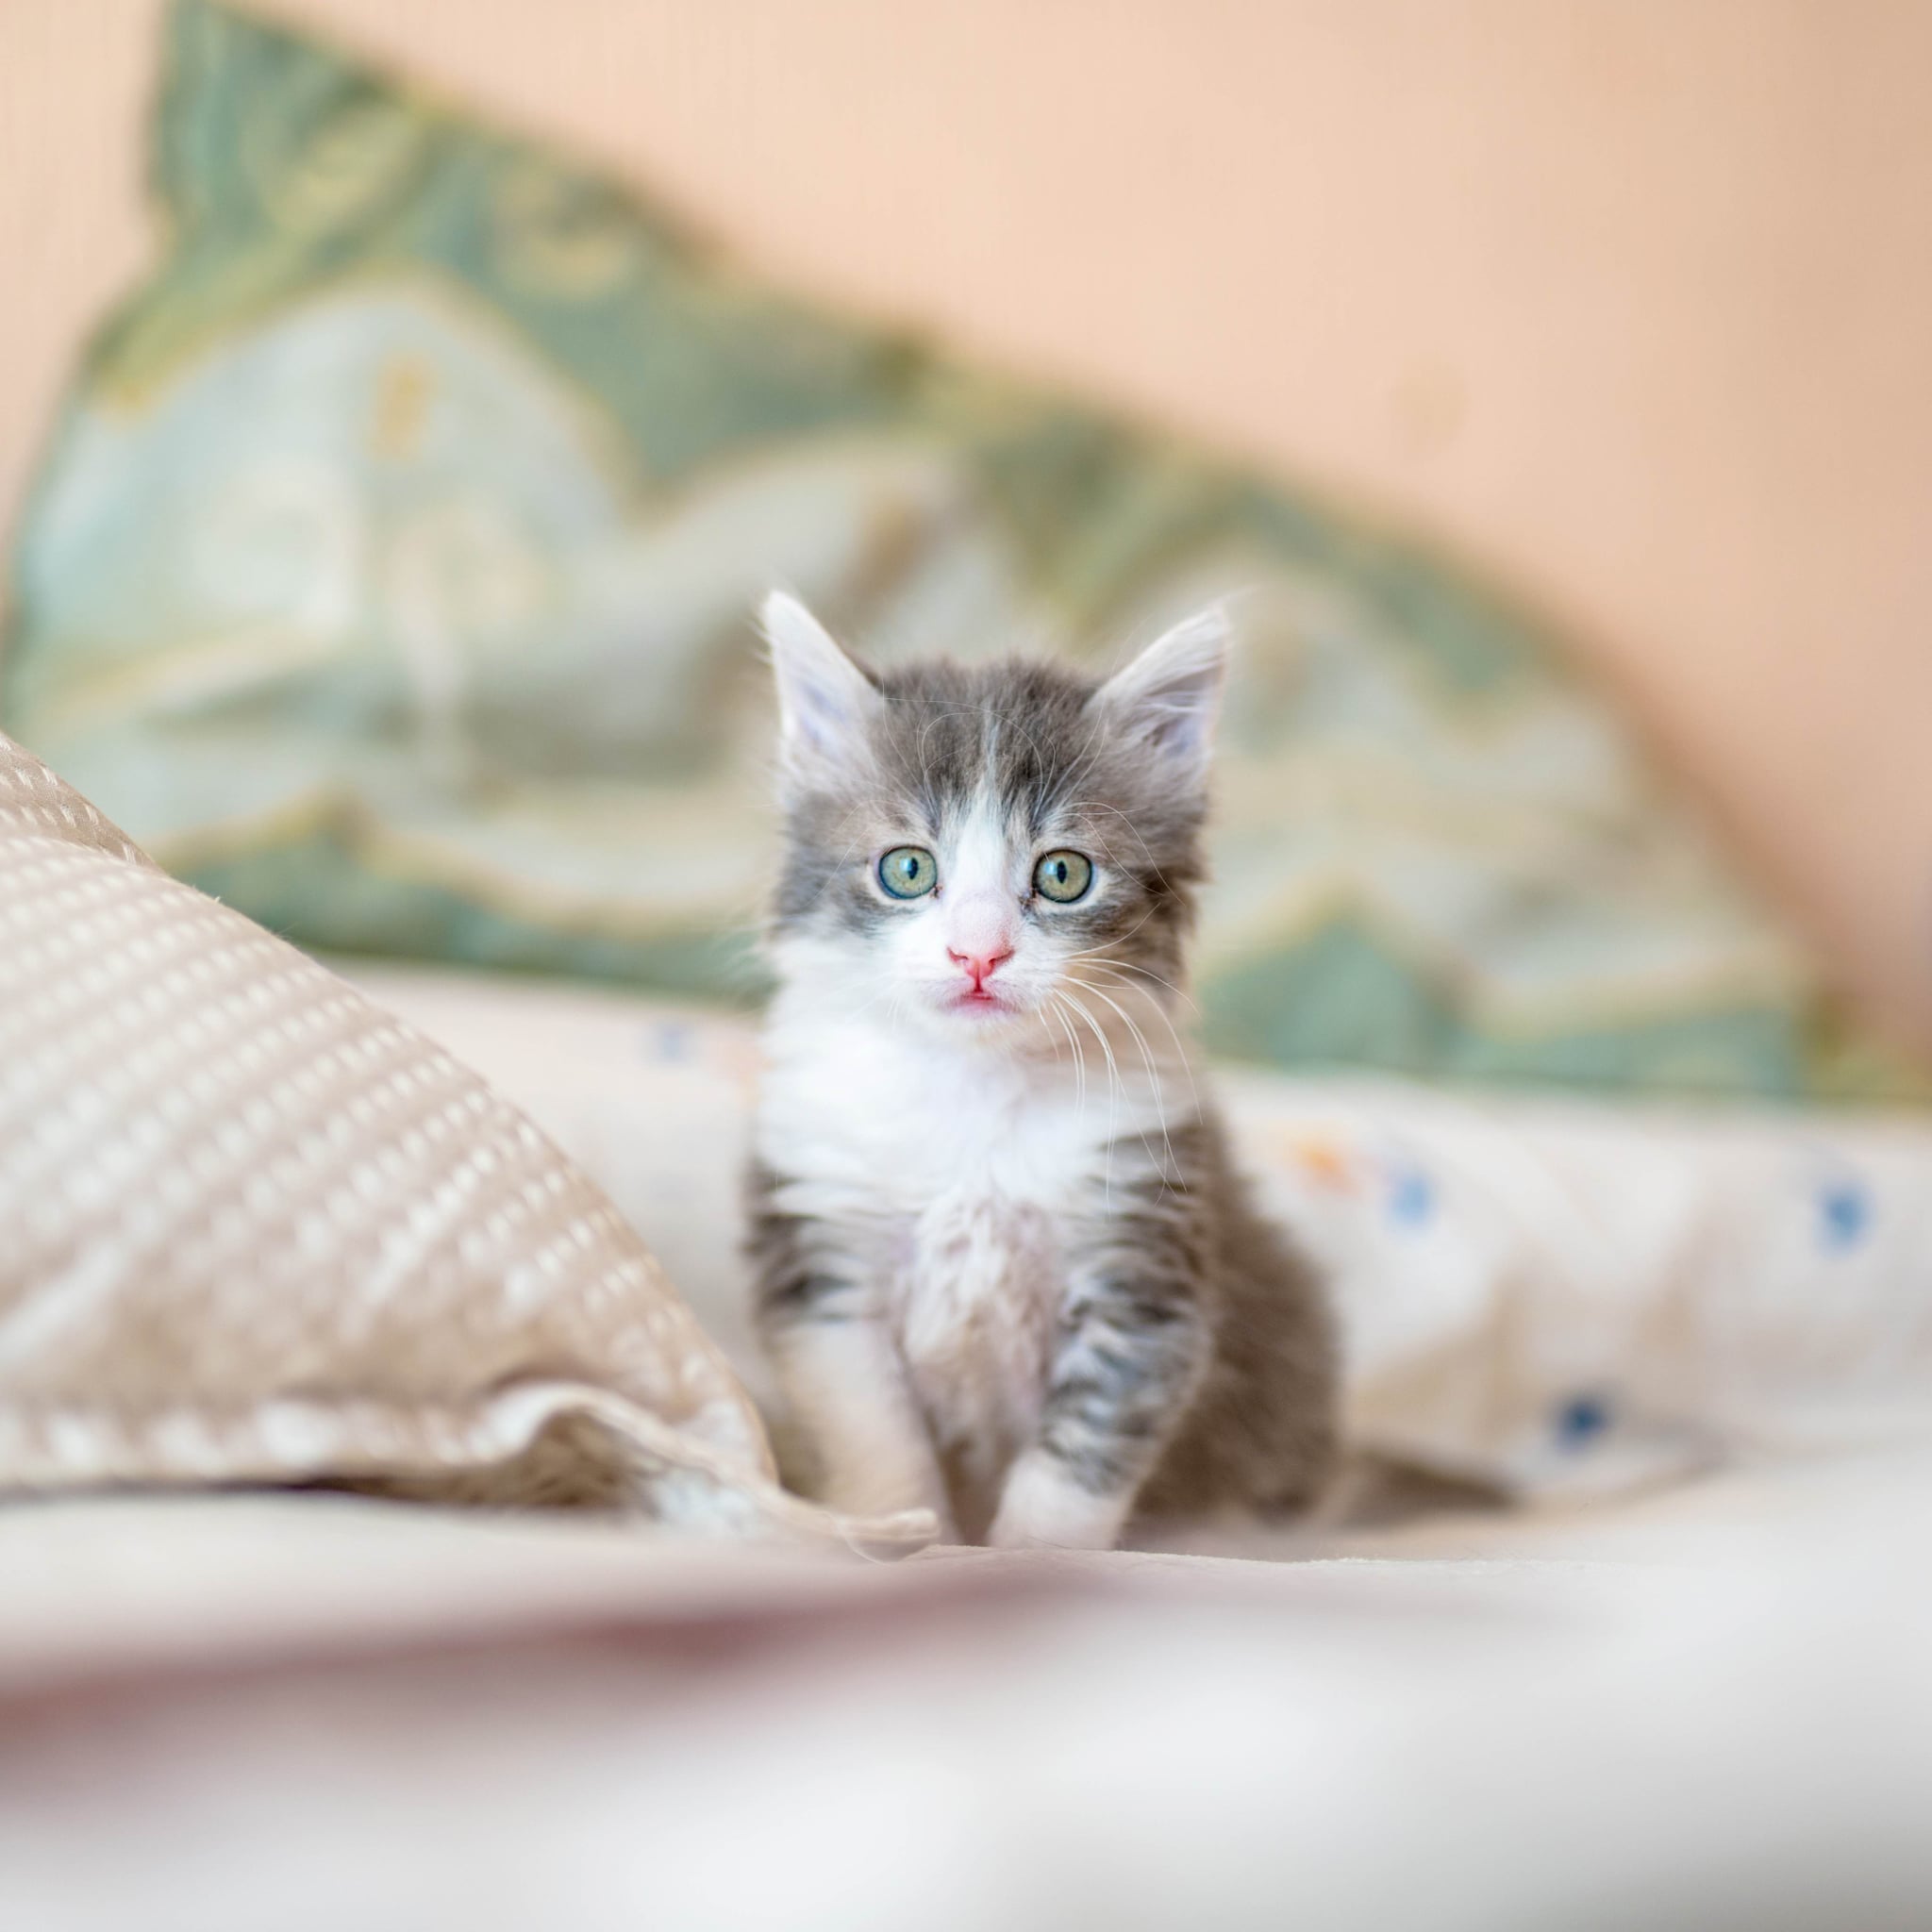 Cute Photos Of Cats And Kittens Popsugar Uk Parenting